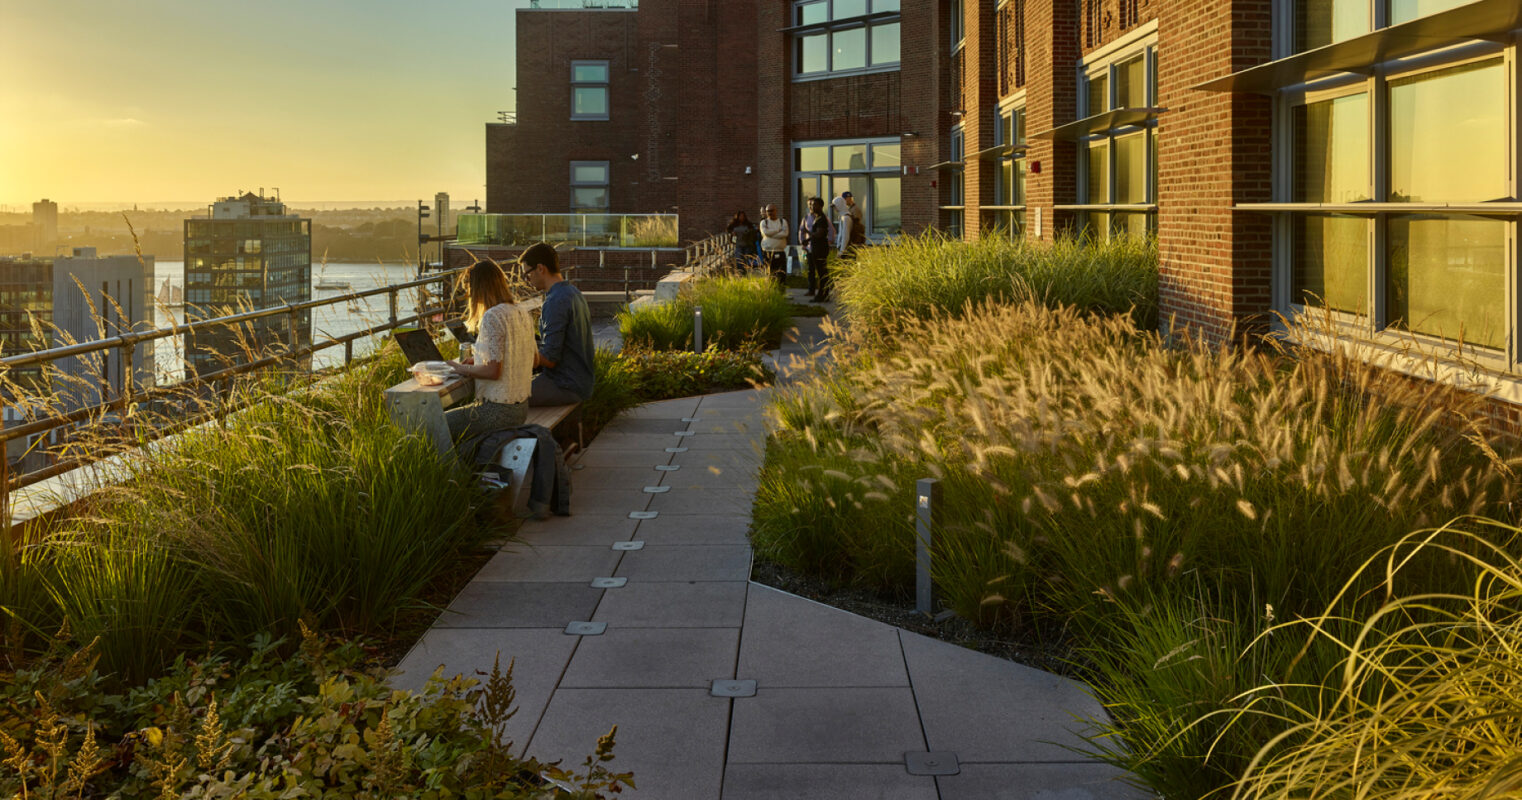 People enjoying a peaceful evening on a modern rooftop garden with lush greenery, comfortable seating, and a view of the cityscape under a warm, golden sunset.